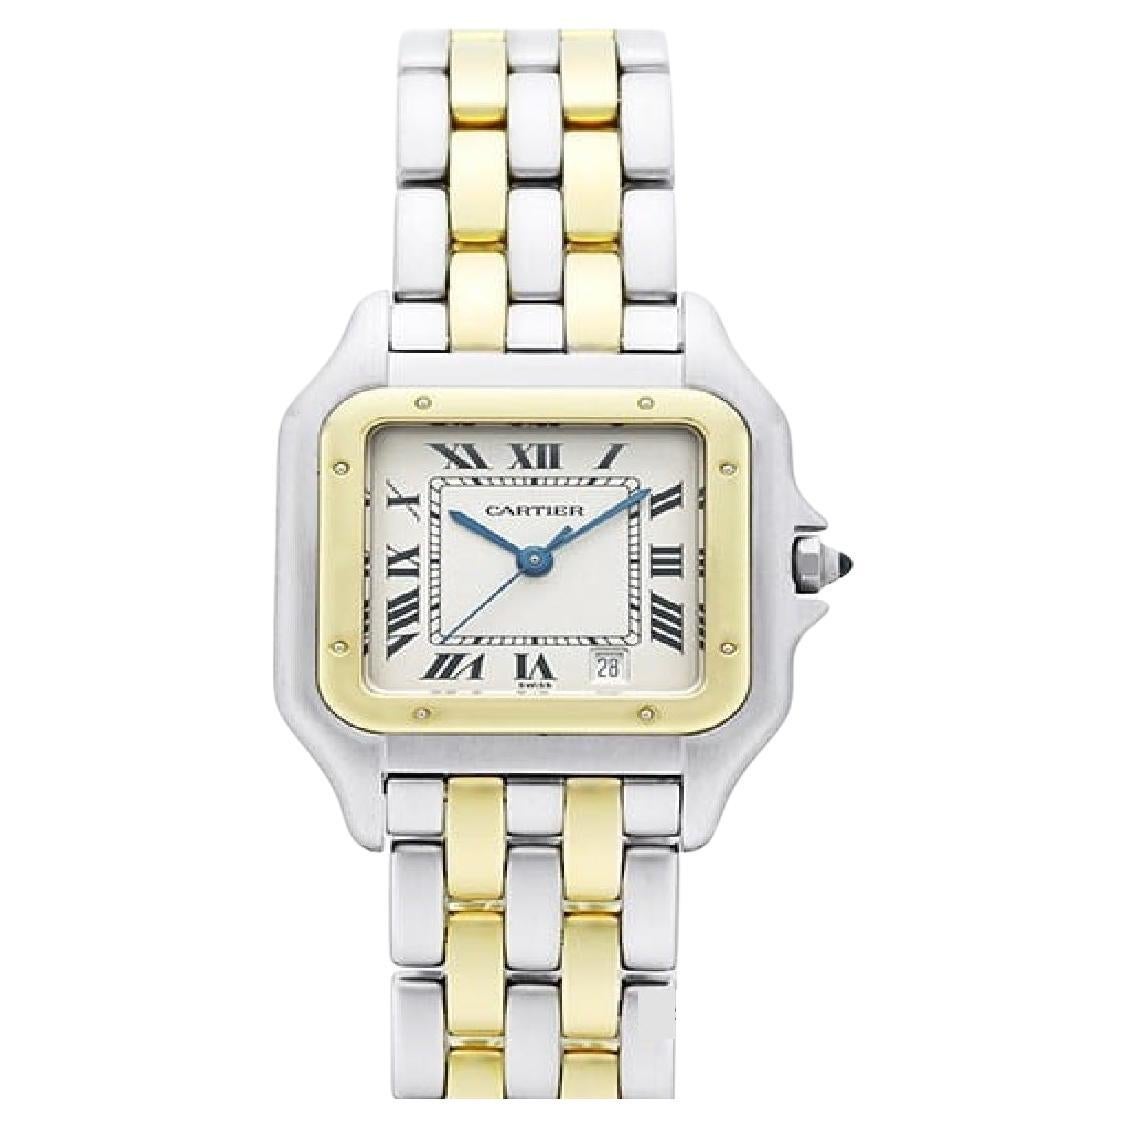 Cartier Panthère MM W25028B6 - Iconic Gold & Stainless Steel Men's Watch